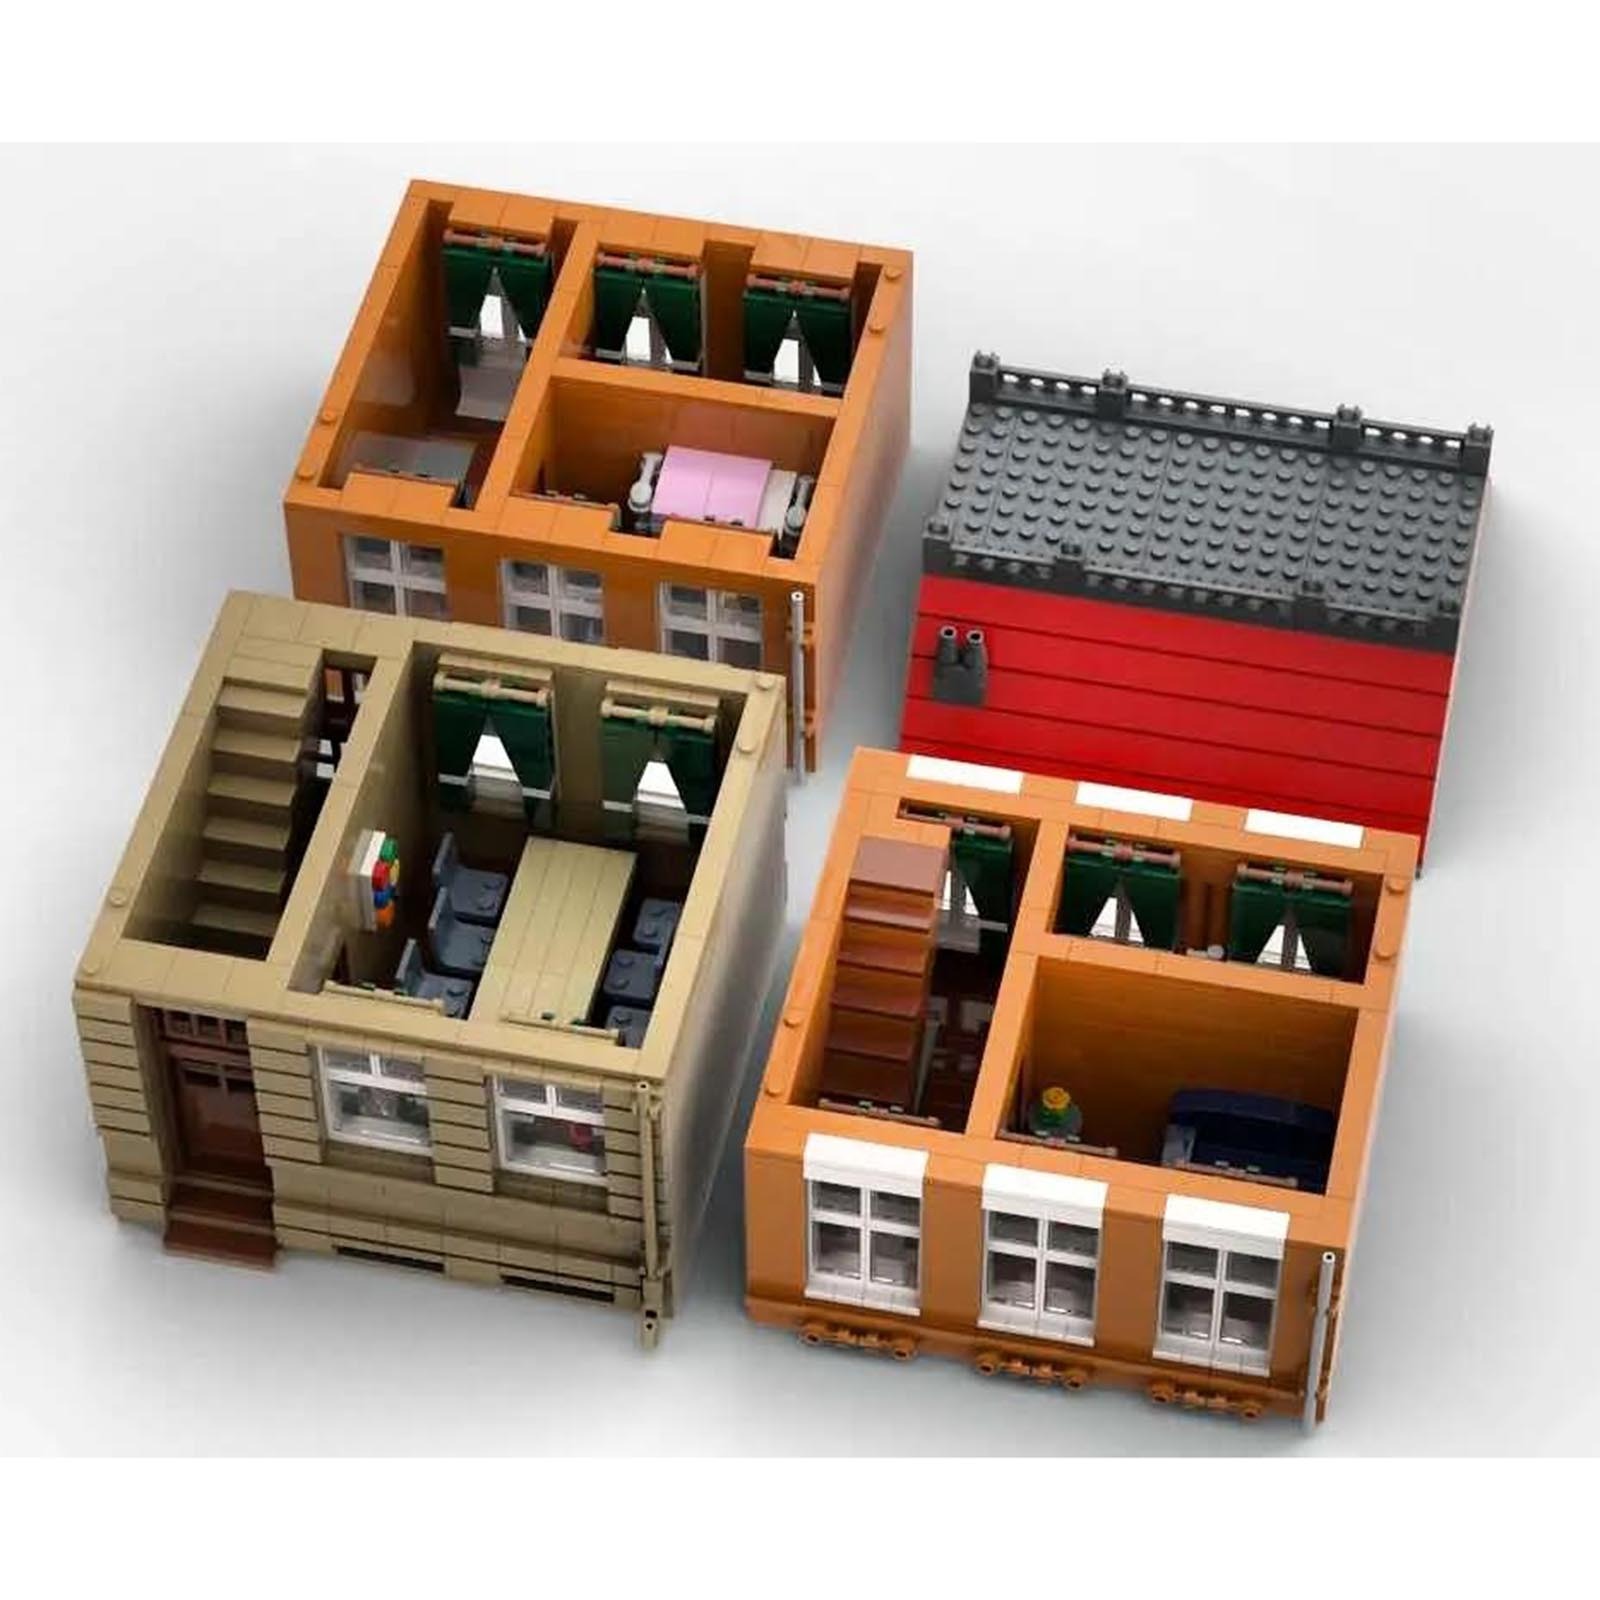 Lindenstrasse No. 24 MOC-89522 Modular Buildings With 2091 Pieces